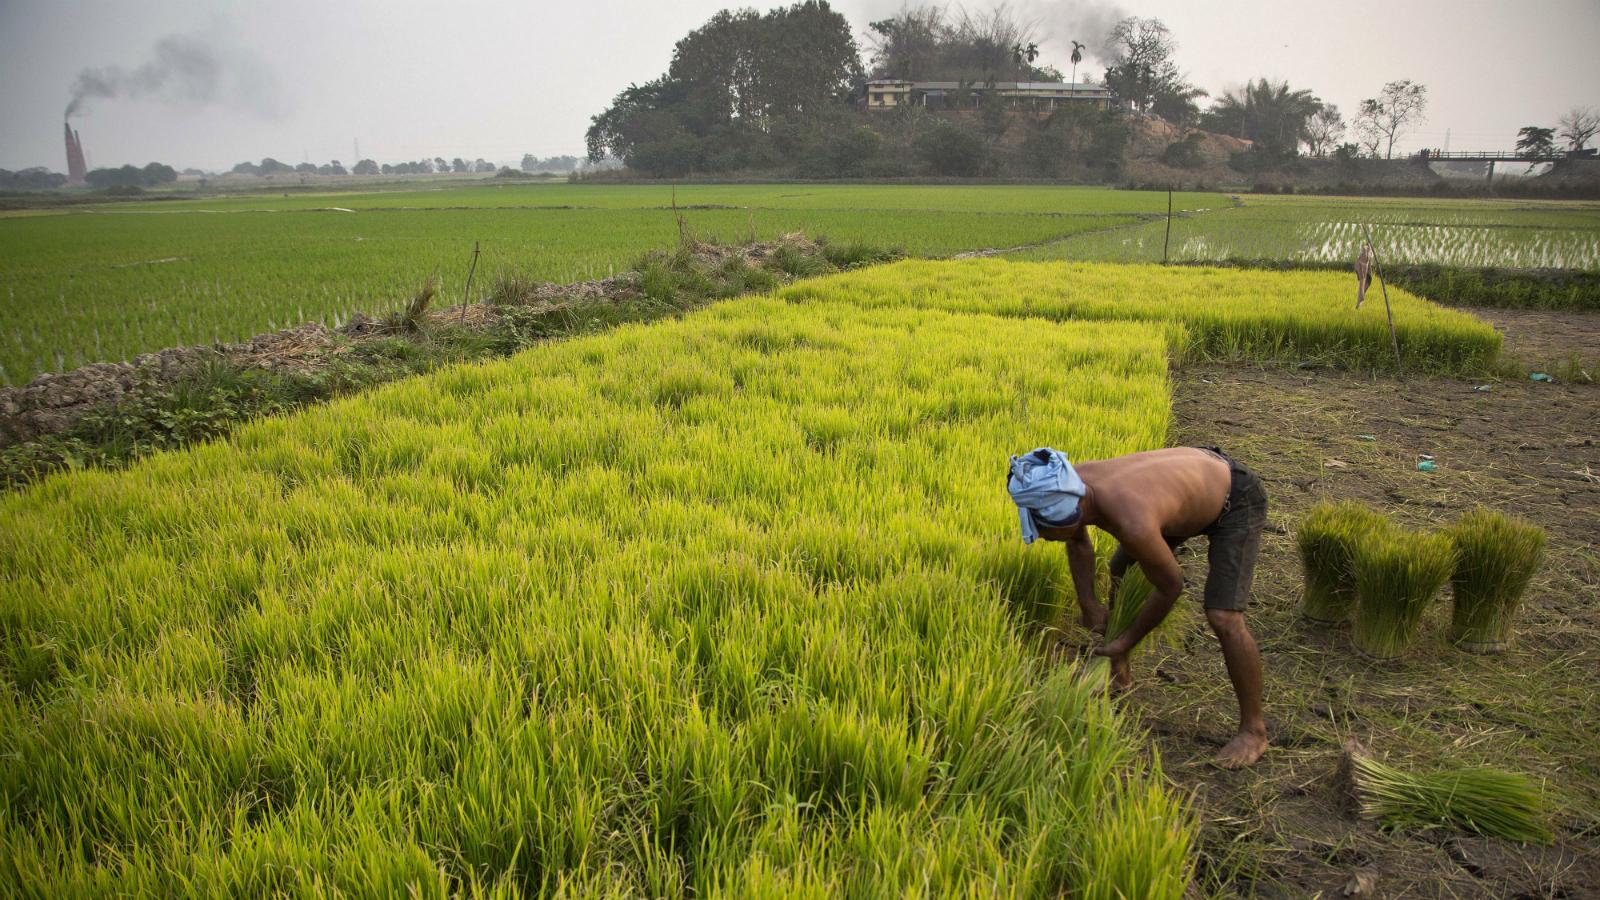 A much needed rehaul for India’s Agricultural Policies?